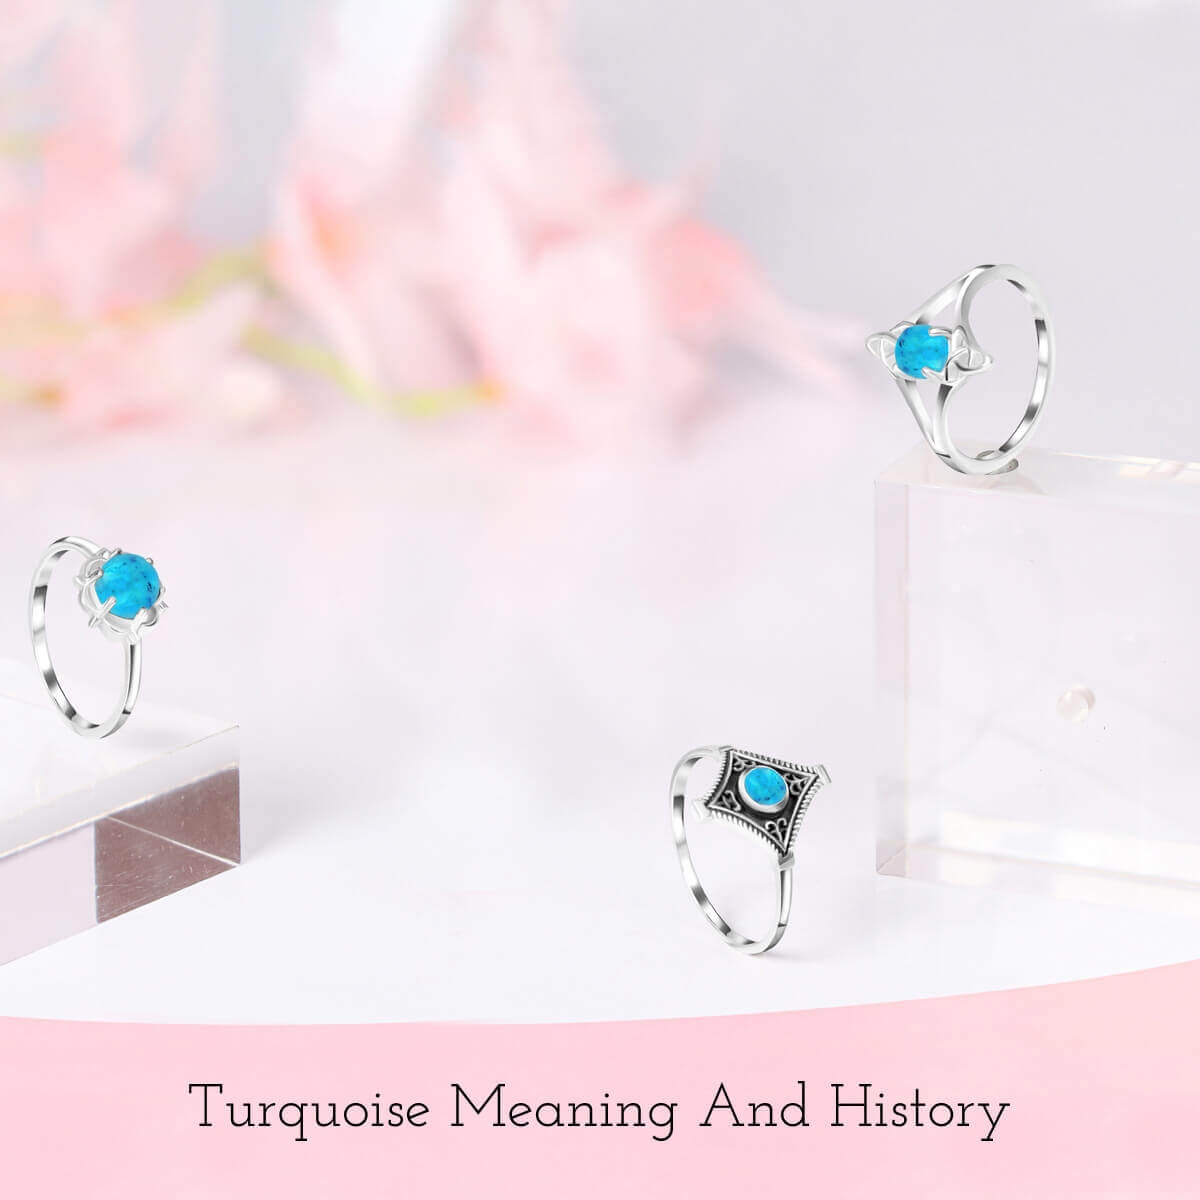 Turquoise Meaning And History